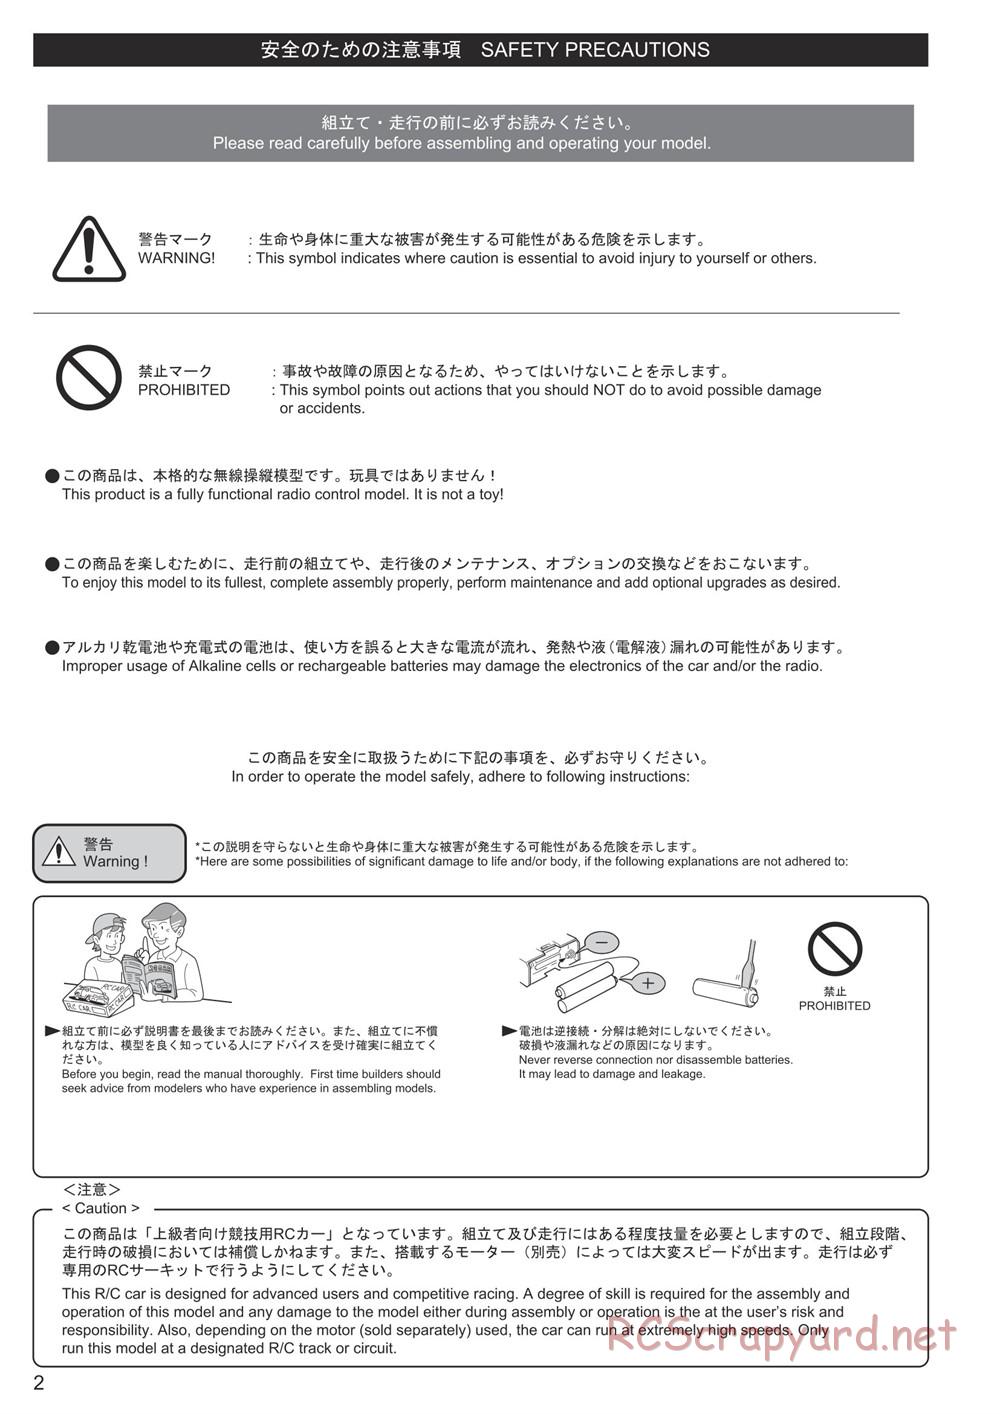 Kyosho - Ultima RB7 - Manual - Page 2